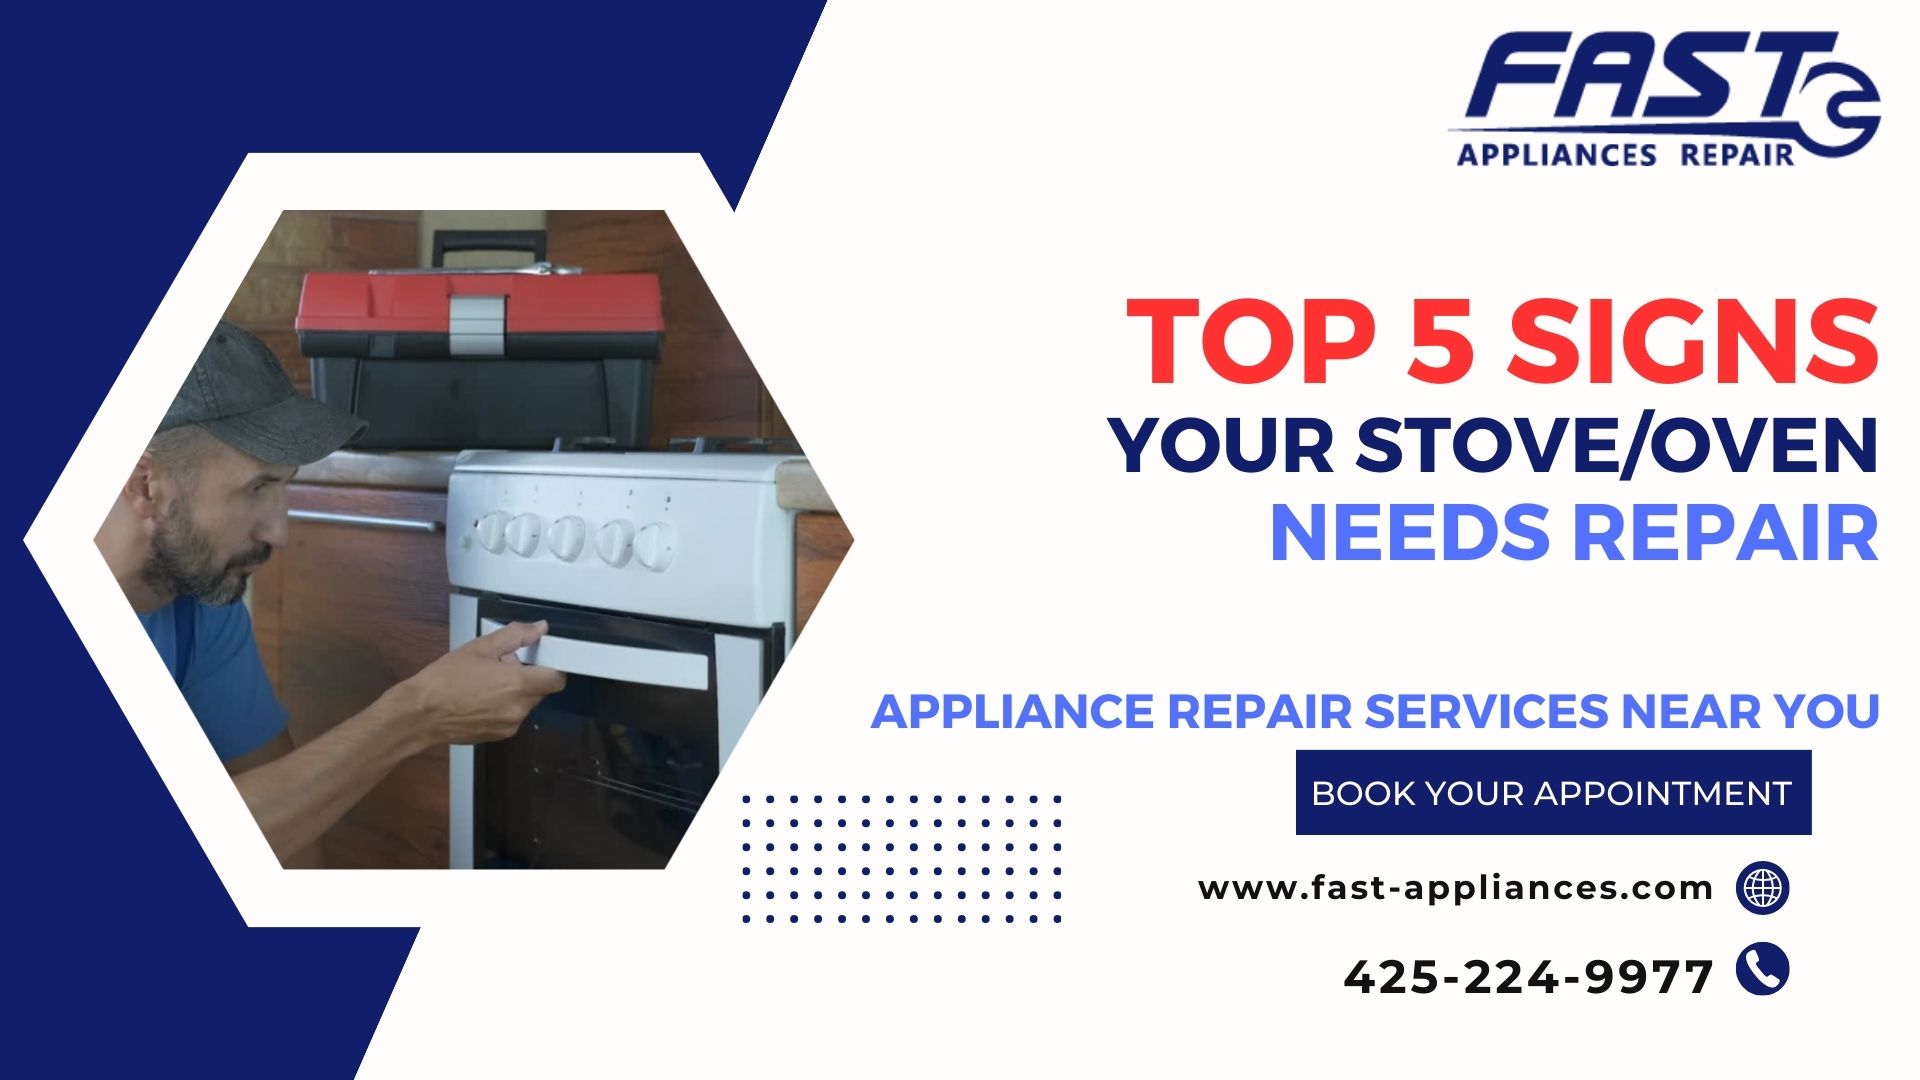 Top 5 Signs Your Stove, Oven, or Cooking Range Needs Repair in Washington, USA